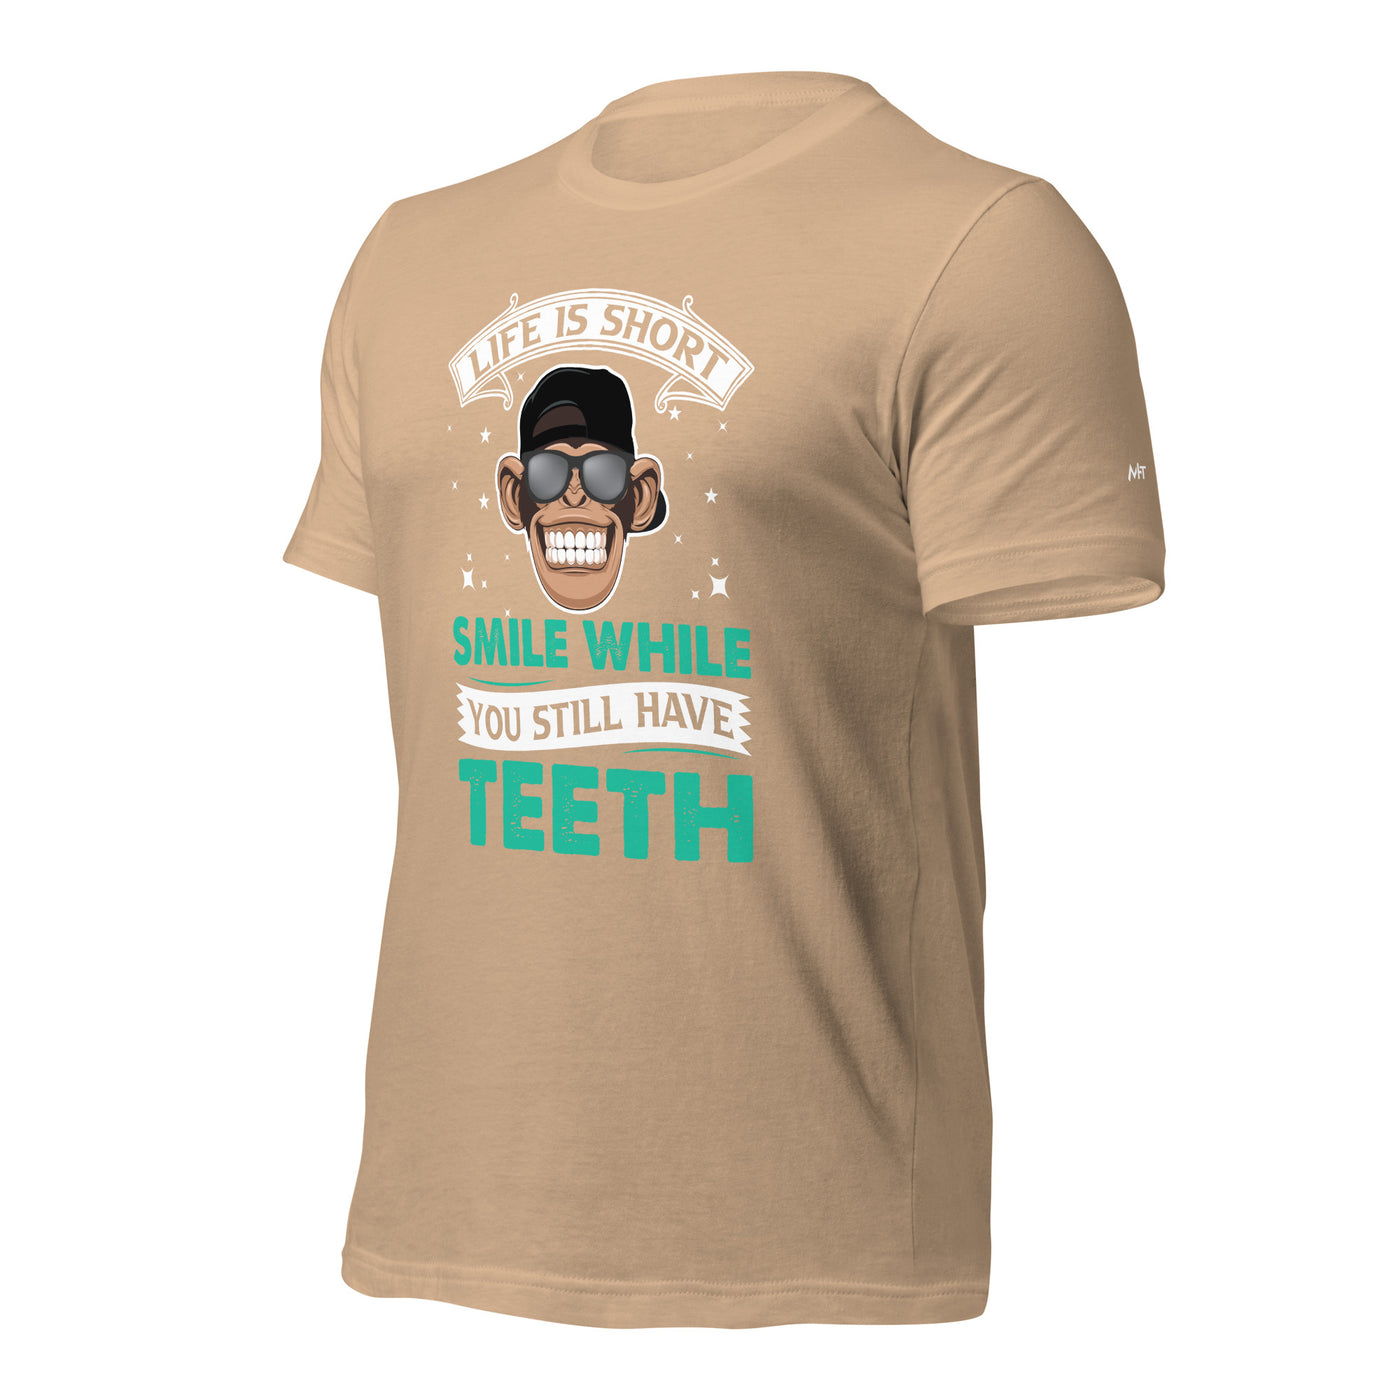 Life is Short, Smile while you still have teeth - Unisex t-shirt